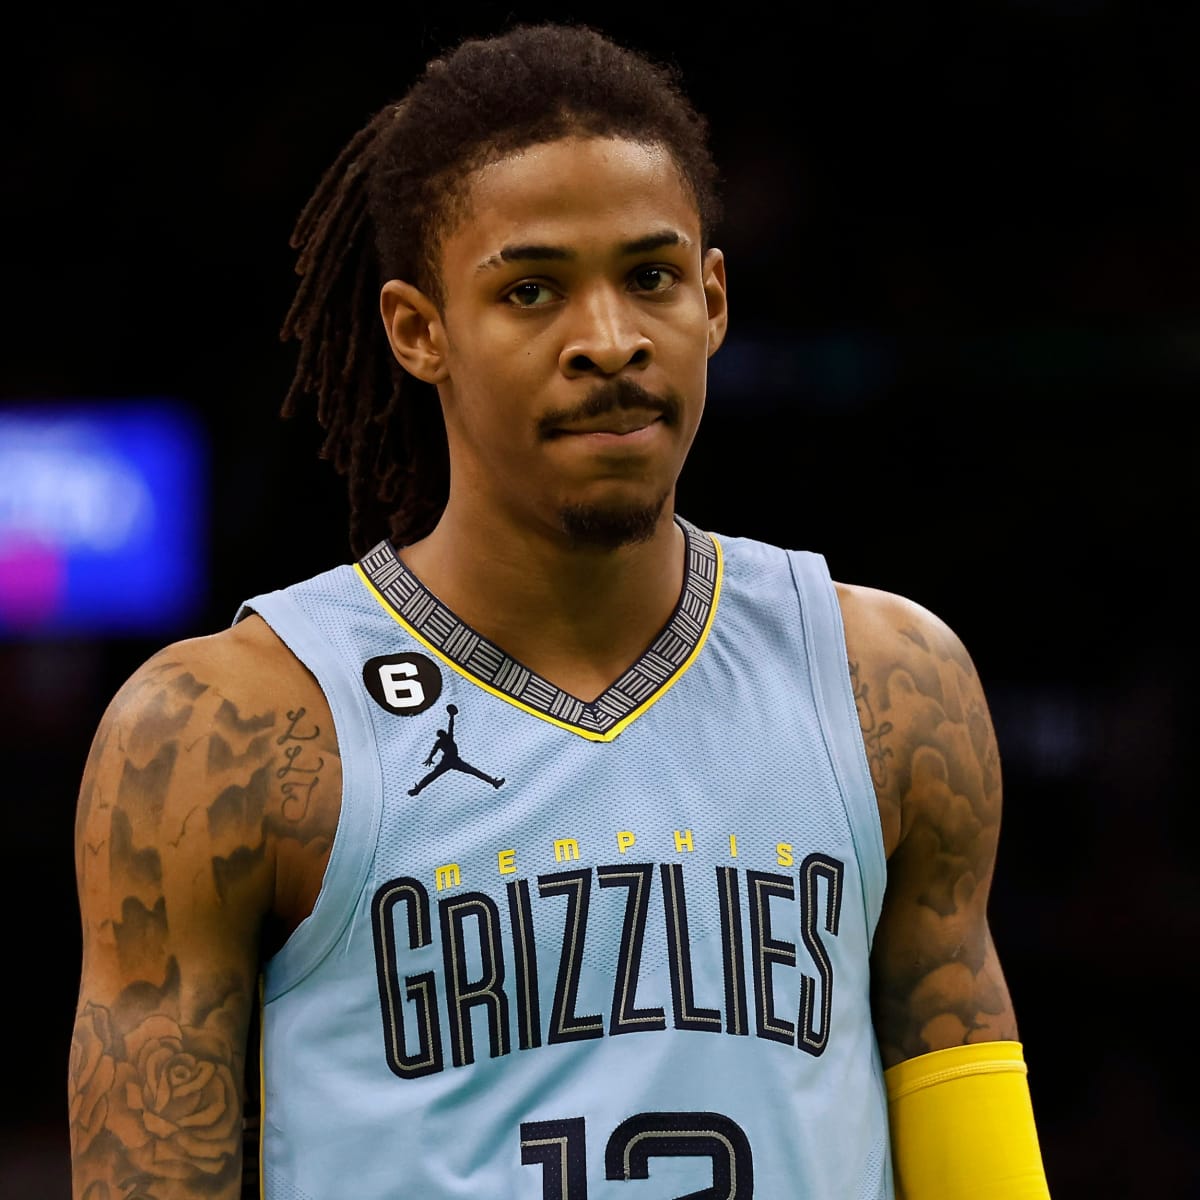 Ja Morant, a guard with the Memphis Grizzlies, has left the team